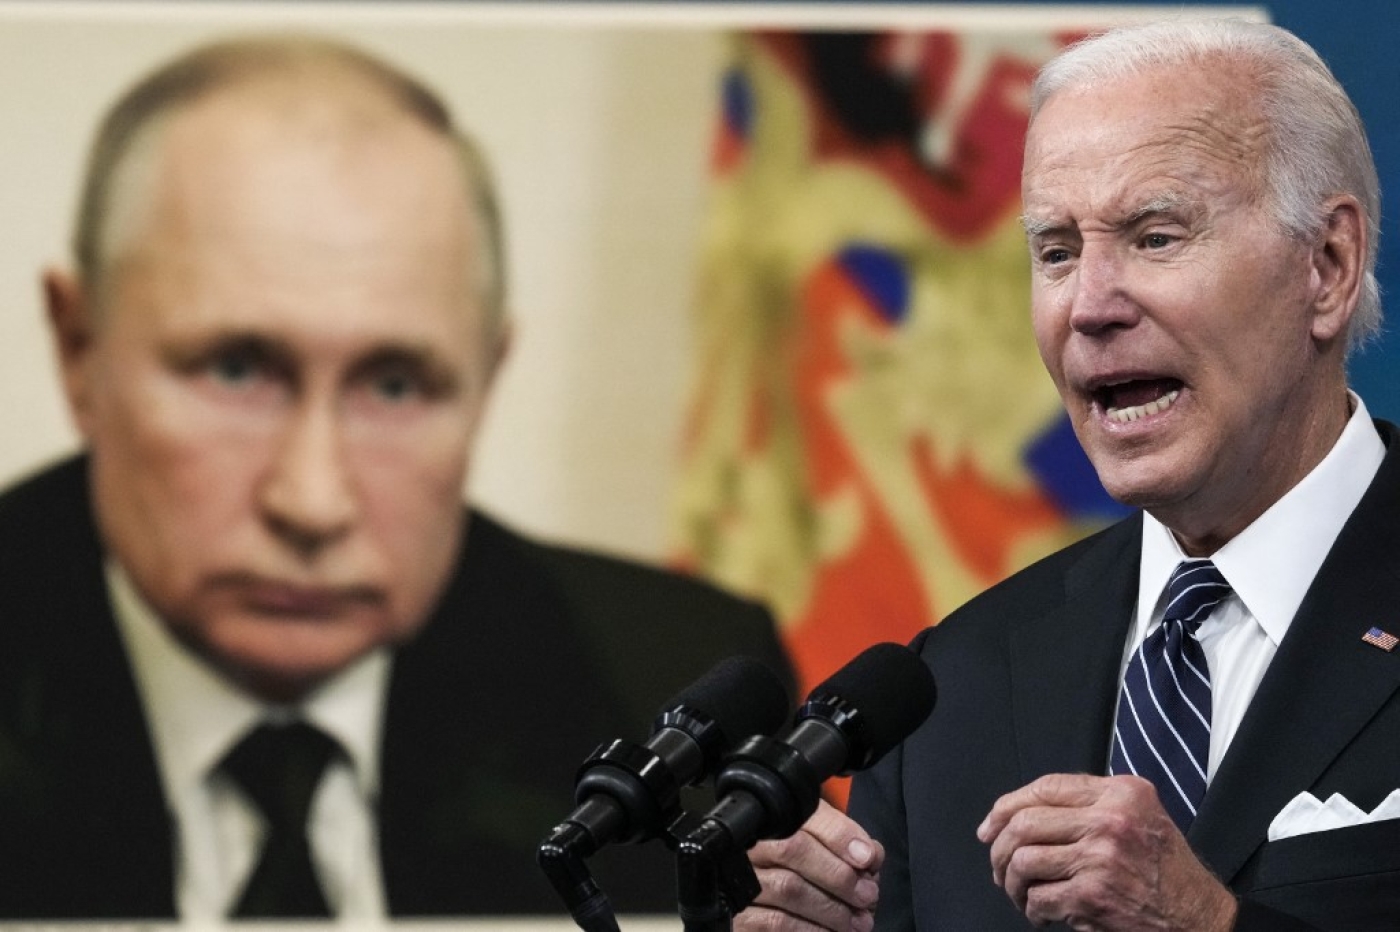 An%20image%20of%20Russian%20President%20Vladimir%20Putin%20is%20displayed%20as%20U.S.%20President%20Joe%20Biden%20speaks%20about%20gas%20prices%20in%20the%20South%20Court%20Auditorium%20at%20the%20White%20House%20campus%20on%20June%2022%2C%202022%20in%20Washington%2C%20DC.%20AFP.jpg